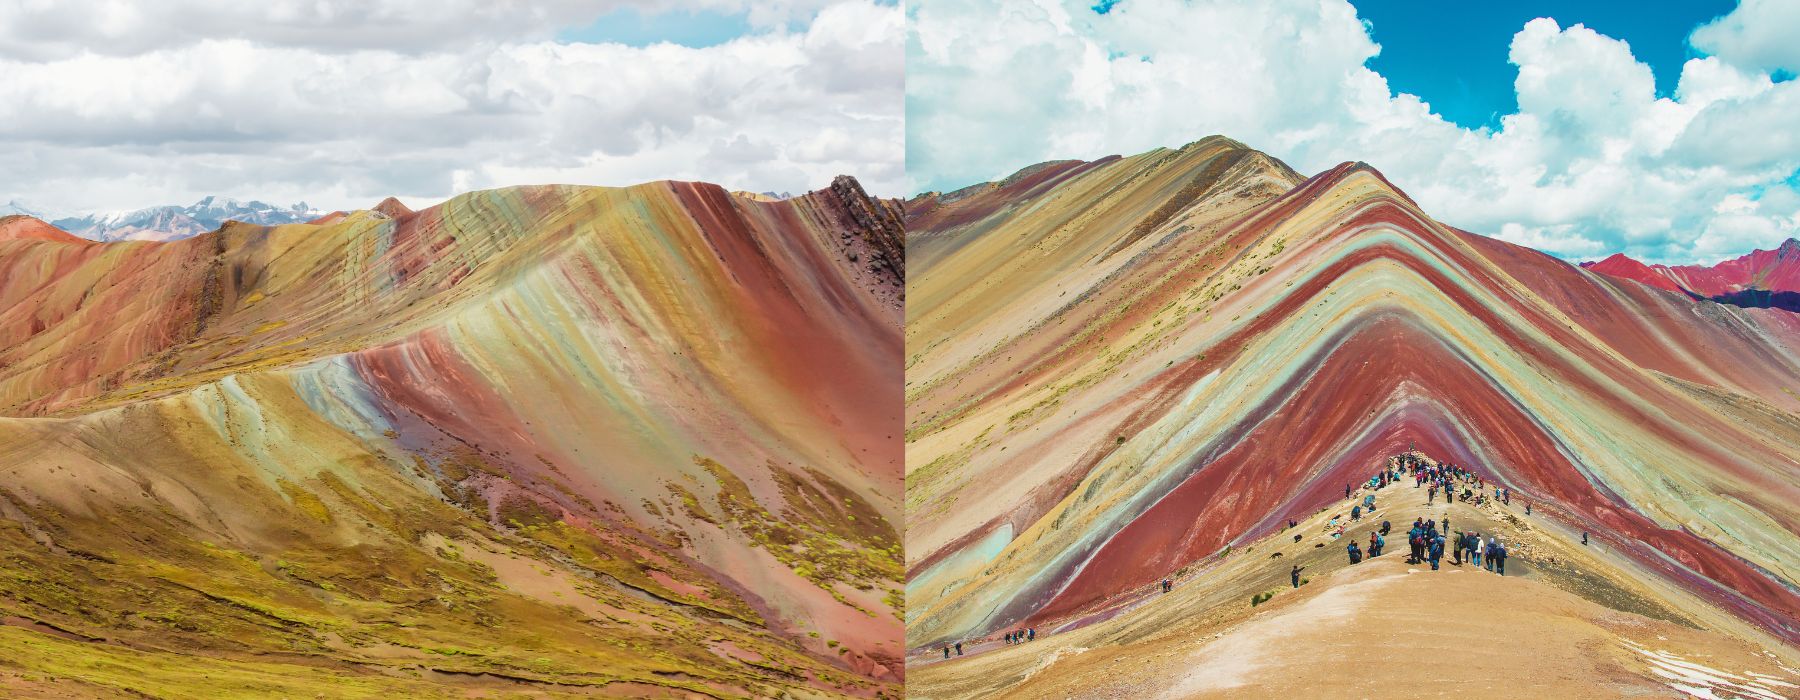 DIFFERENCES BETWEEN VINICUNCA MOUNTAIN AND PALCCOYO